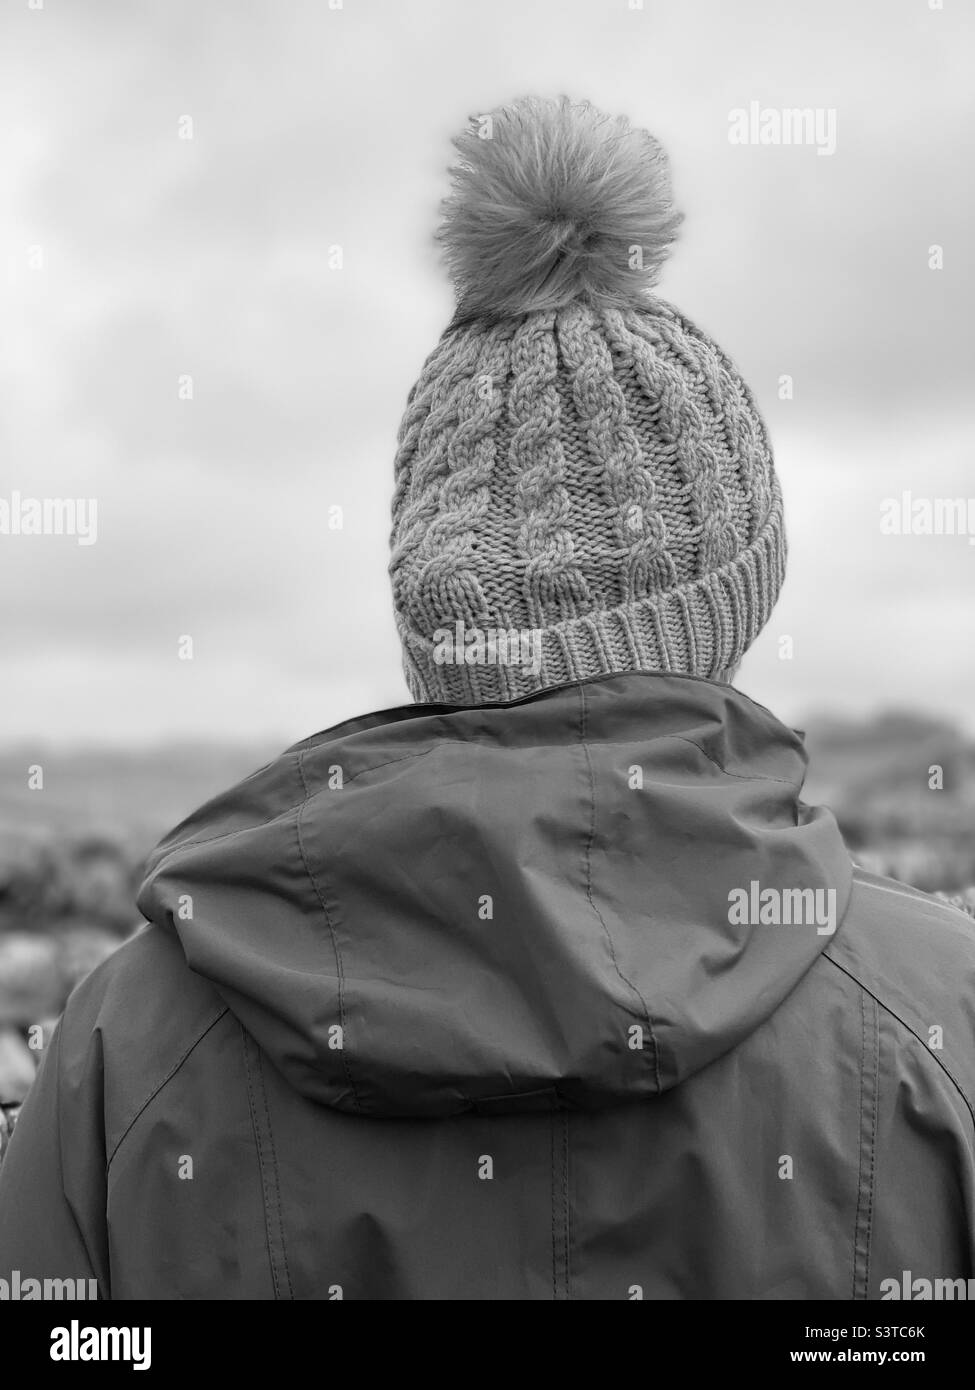 Rear view of woman wearing a knit hat Stock Photo